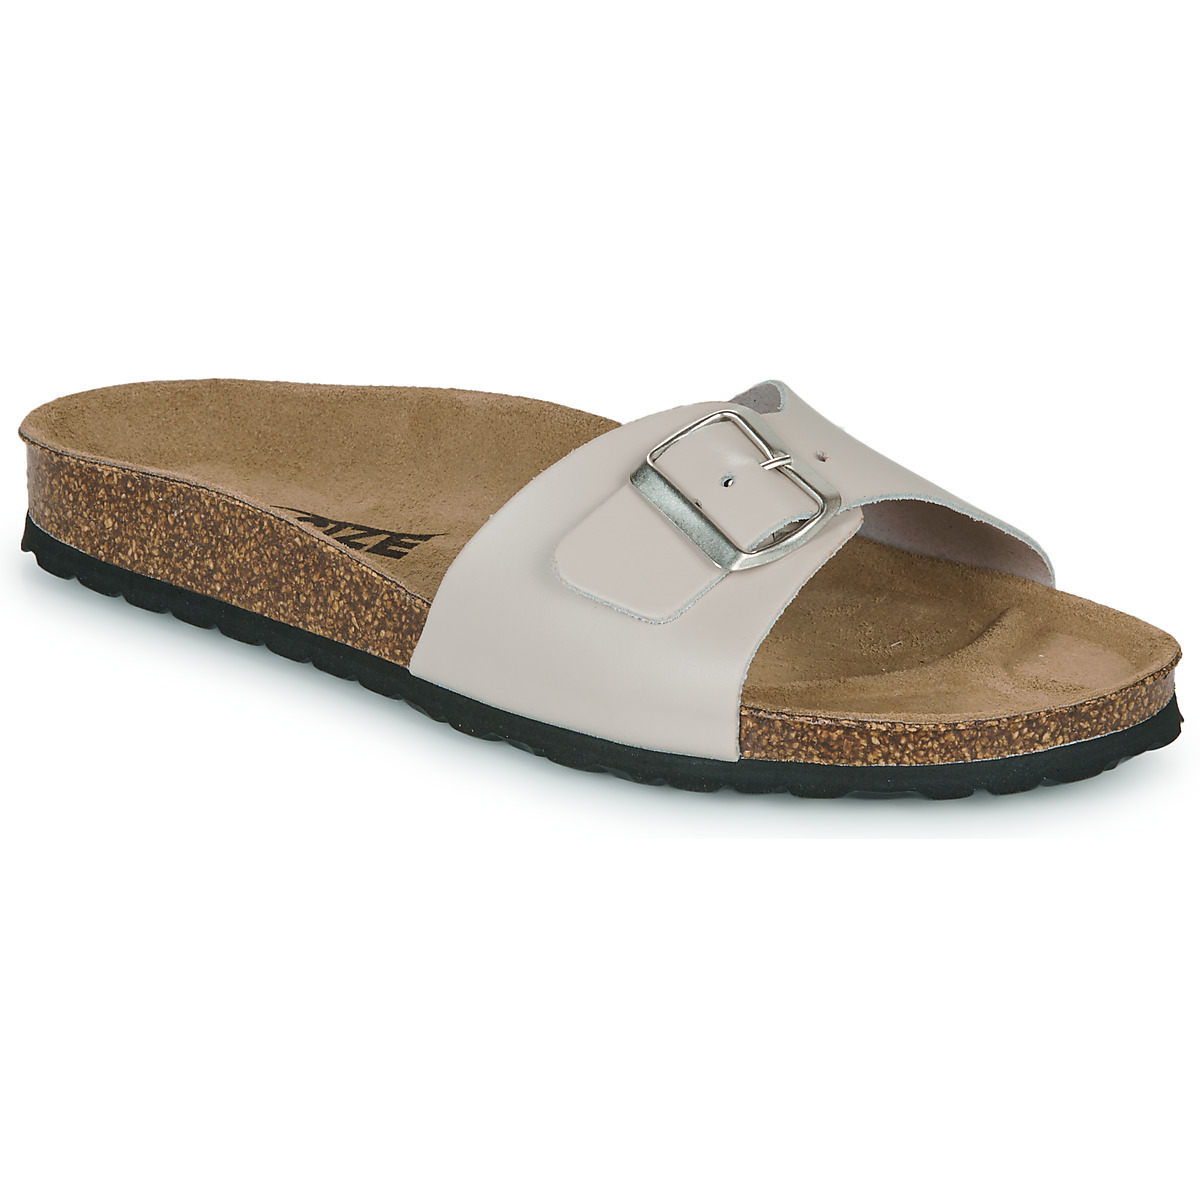 Spartoo Women's Beige Slippers from So Size GOOFASH